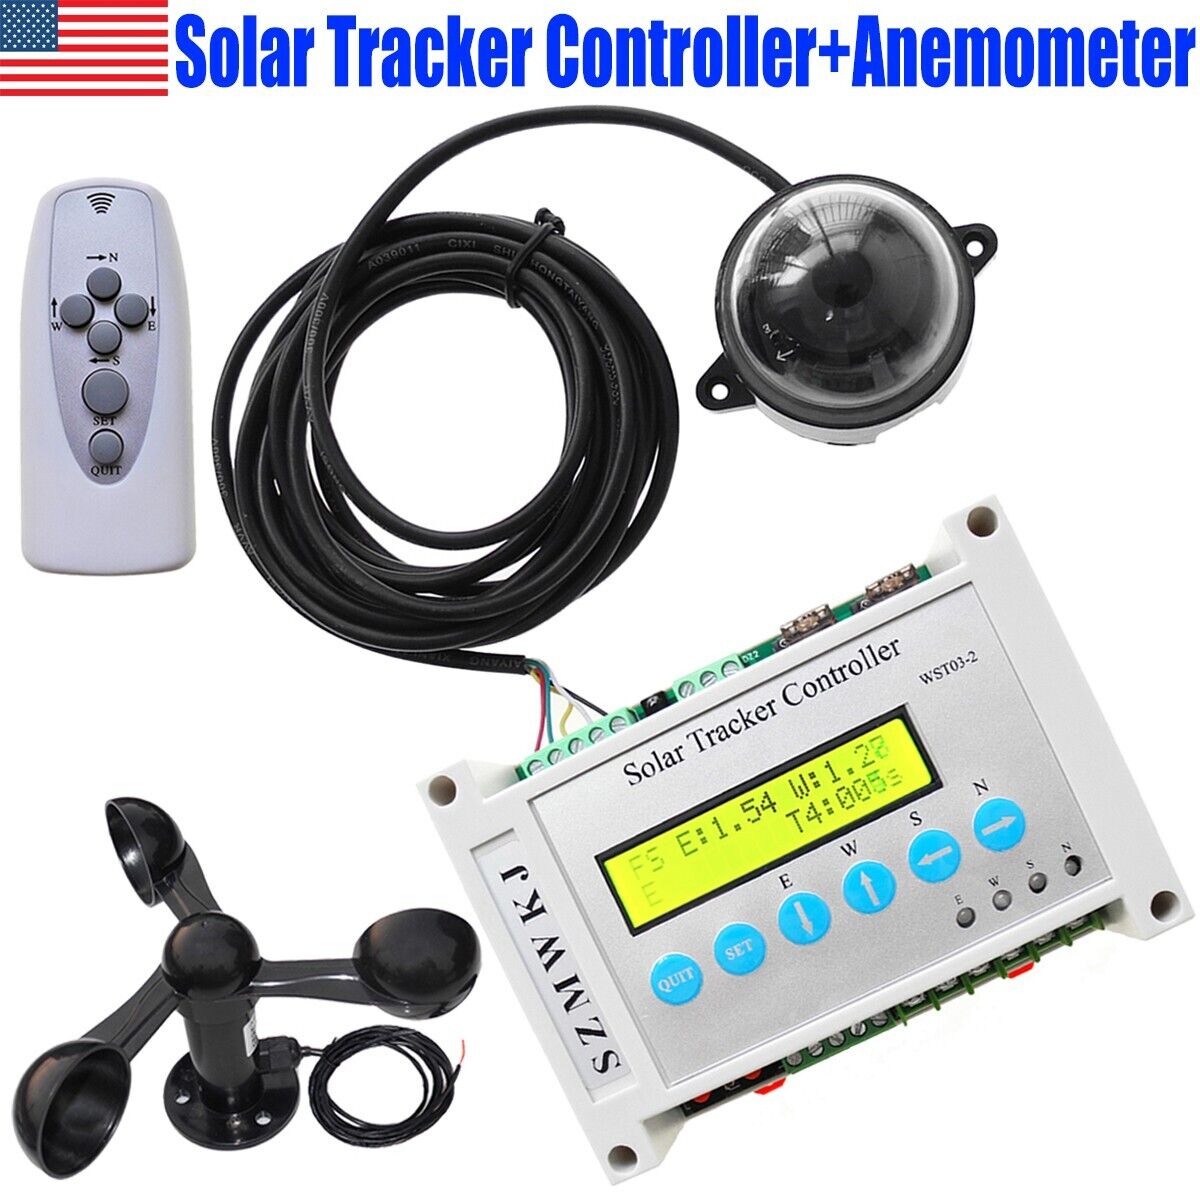 12V 24V Solar Panel Tracking LCD Dual Axis Solar Tracker Controller + Anemometer